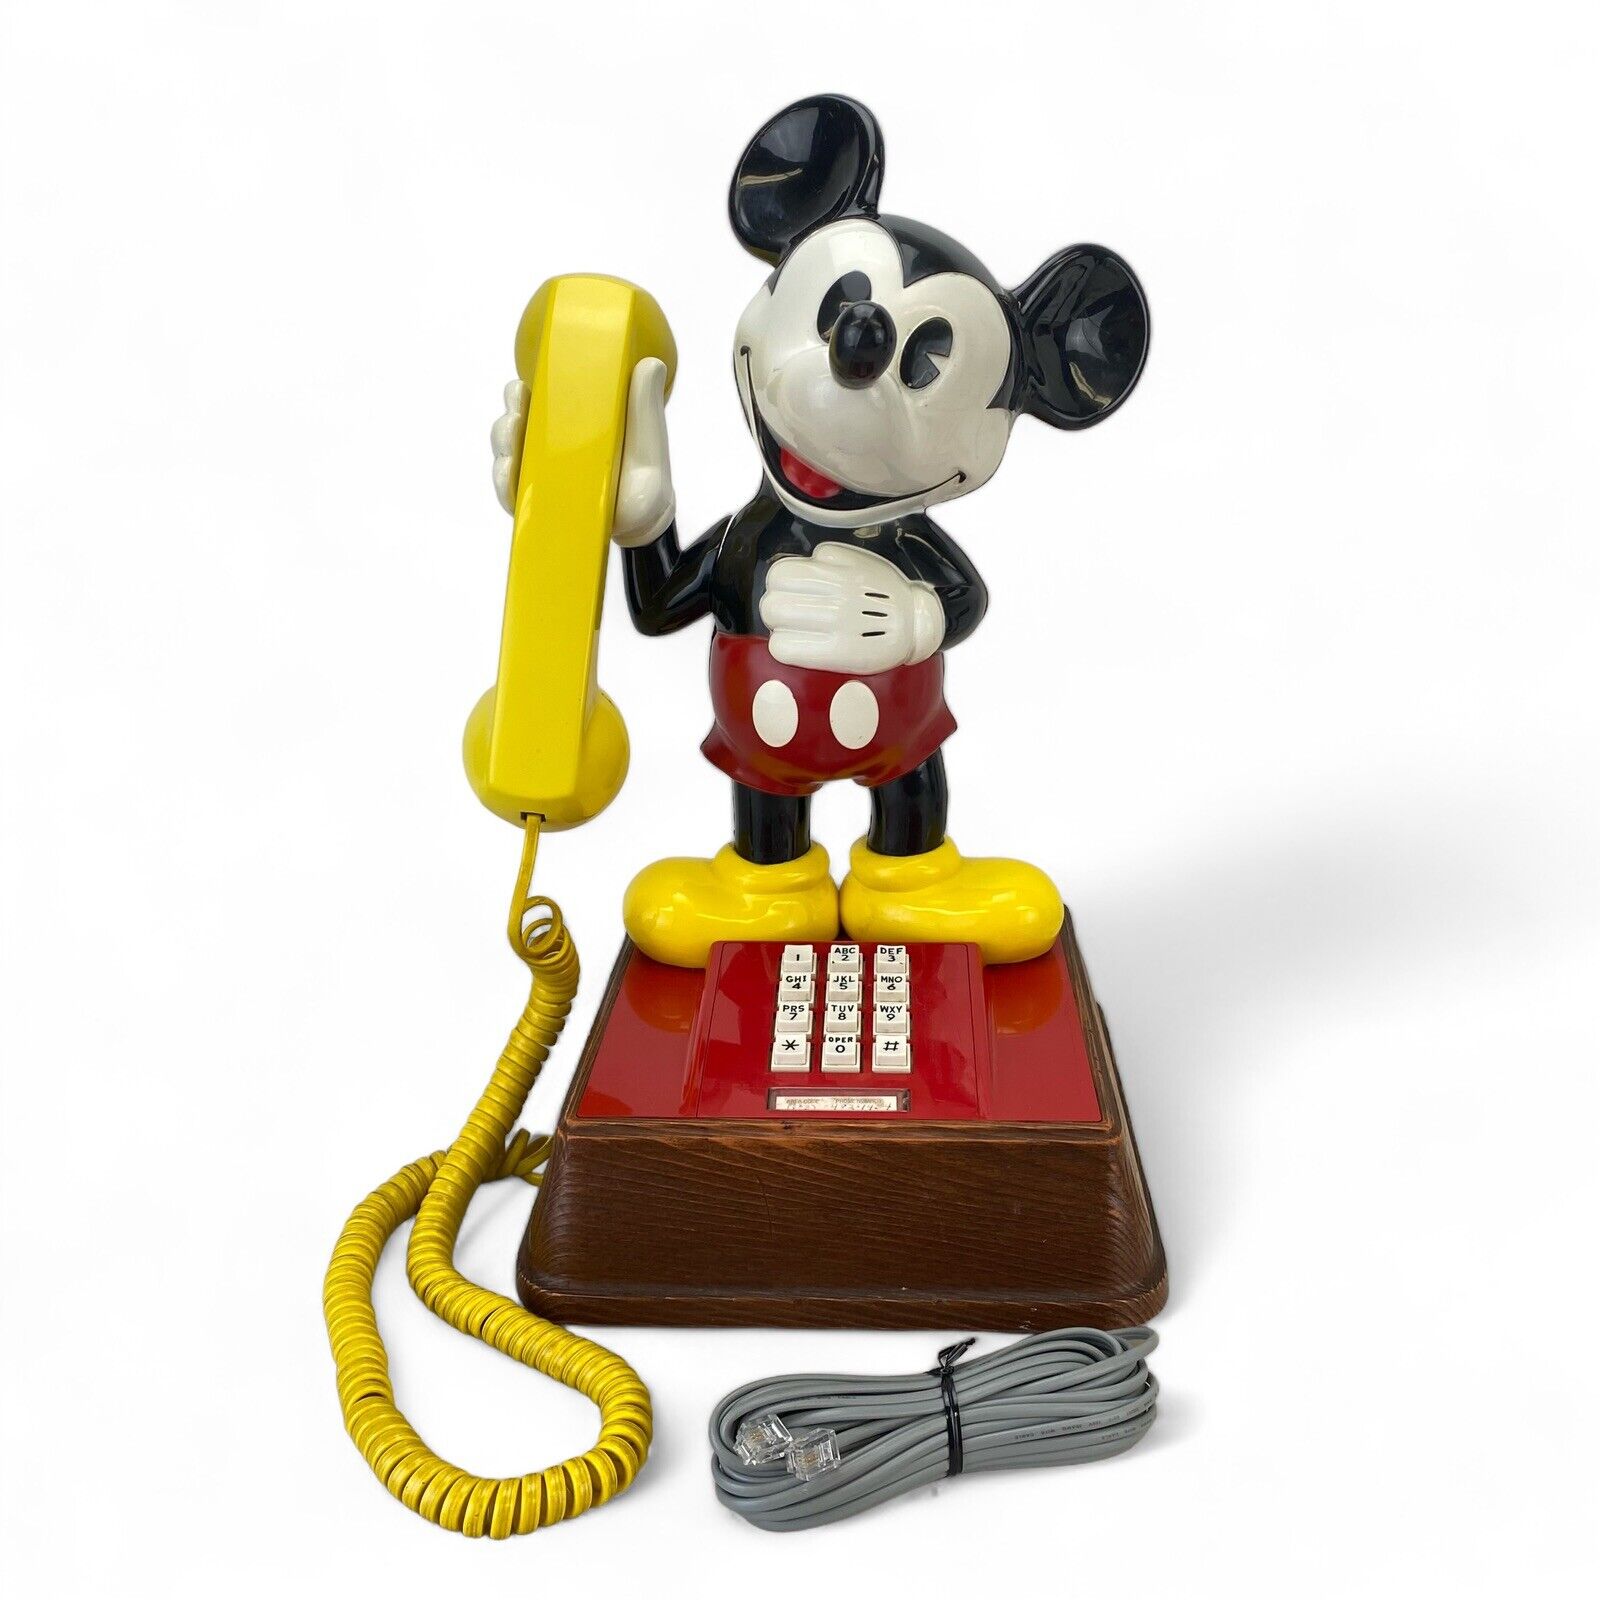 VTG 1981 Disney Mickey Mouse Phone Push-Button Illinois Bell Western Electric